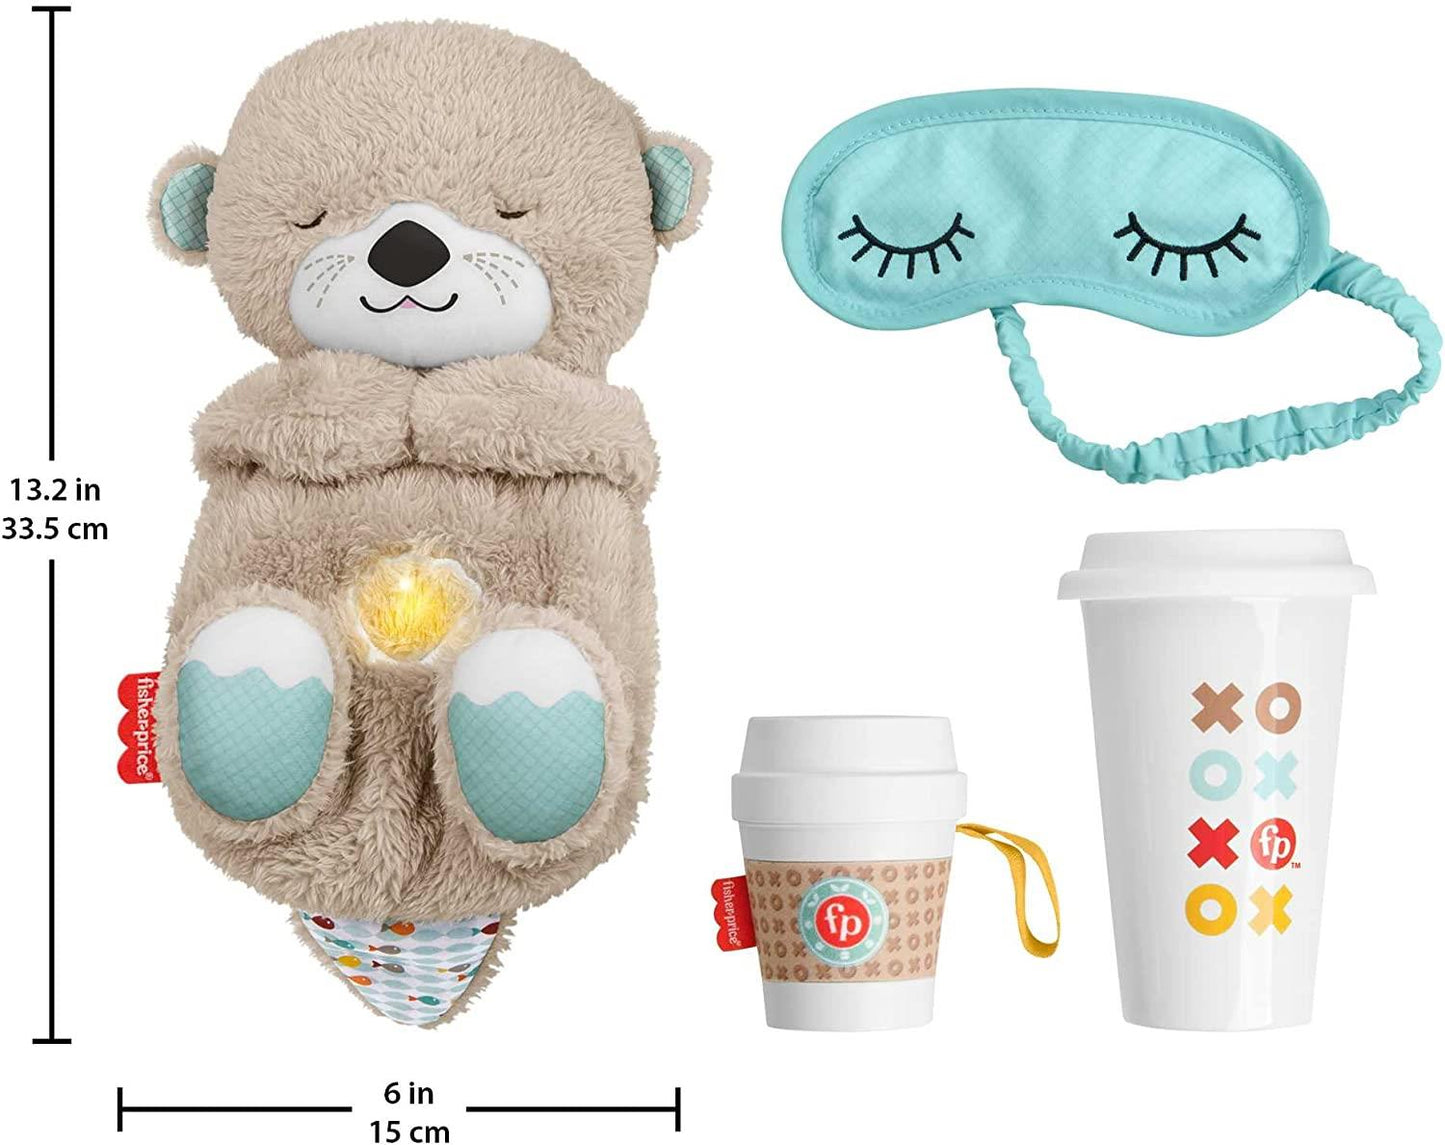 Fisher-Price Soothe, Play & Sip Gift Set for Newborn Baby by Fisher Price - UKBuyZone